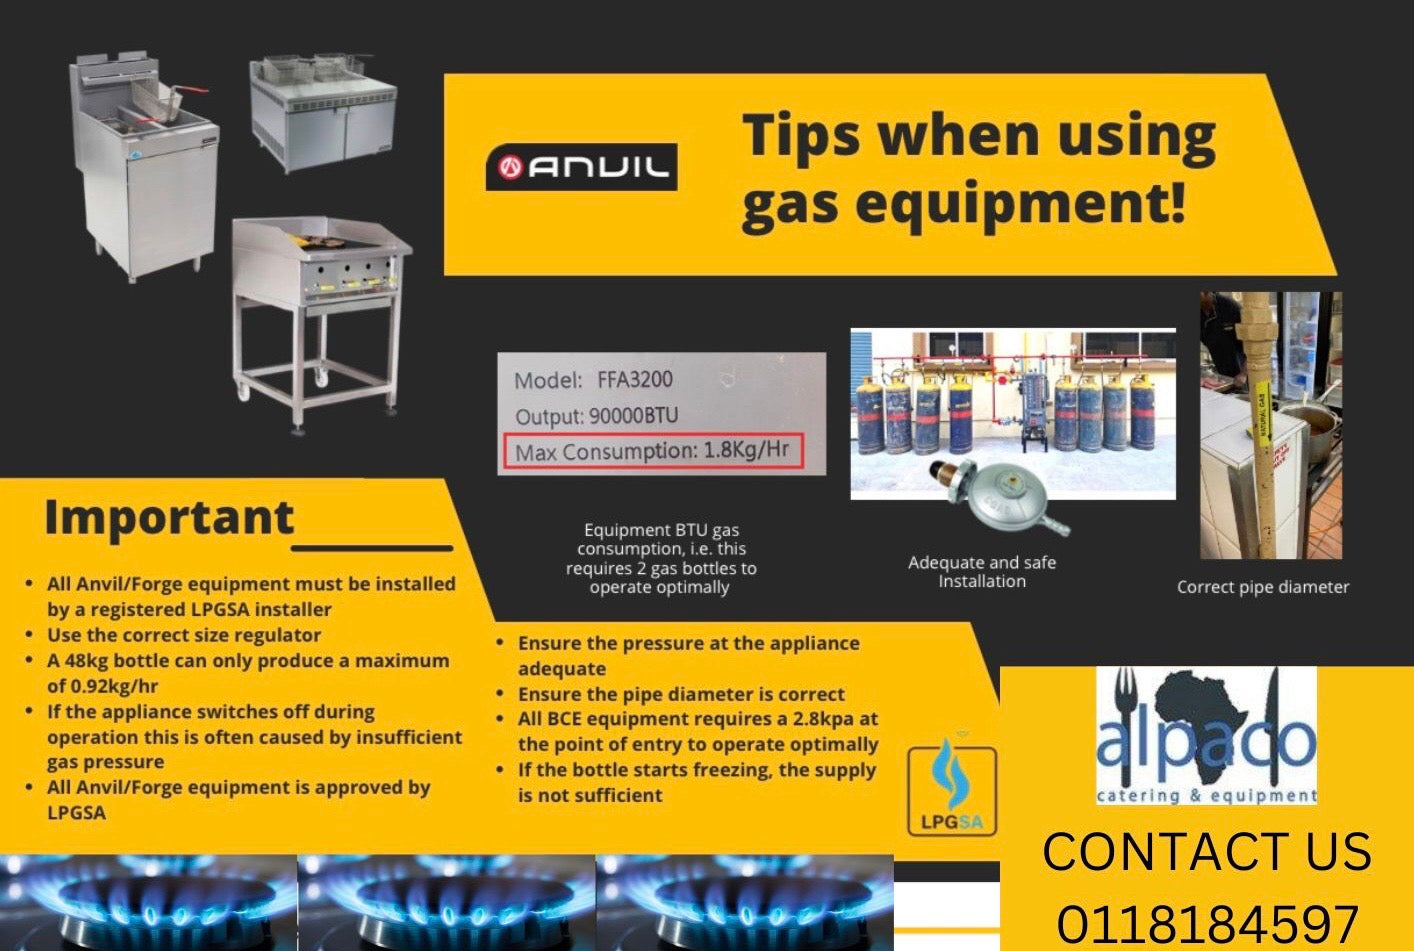 TIPS WHEN USING GAS EQUIPMENT Alpaco Catering & Equipment